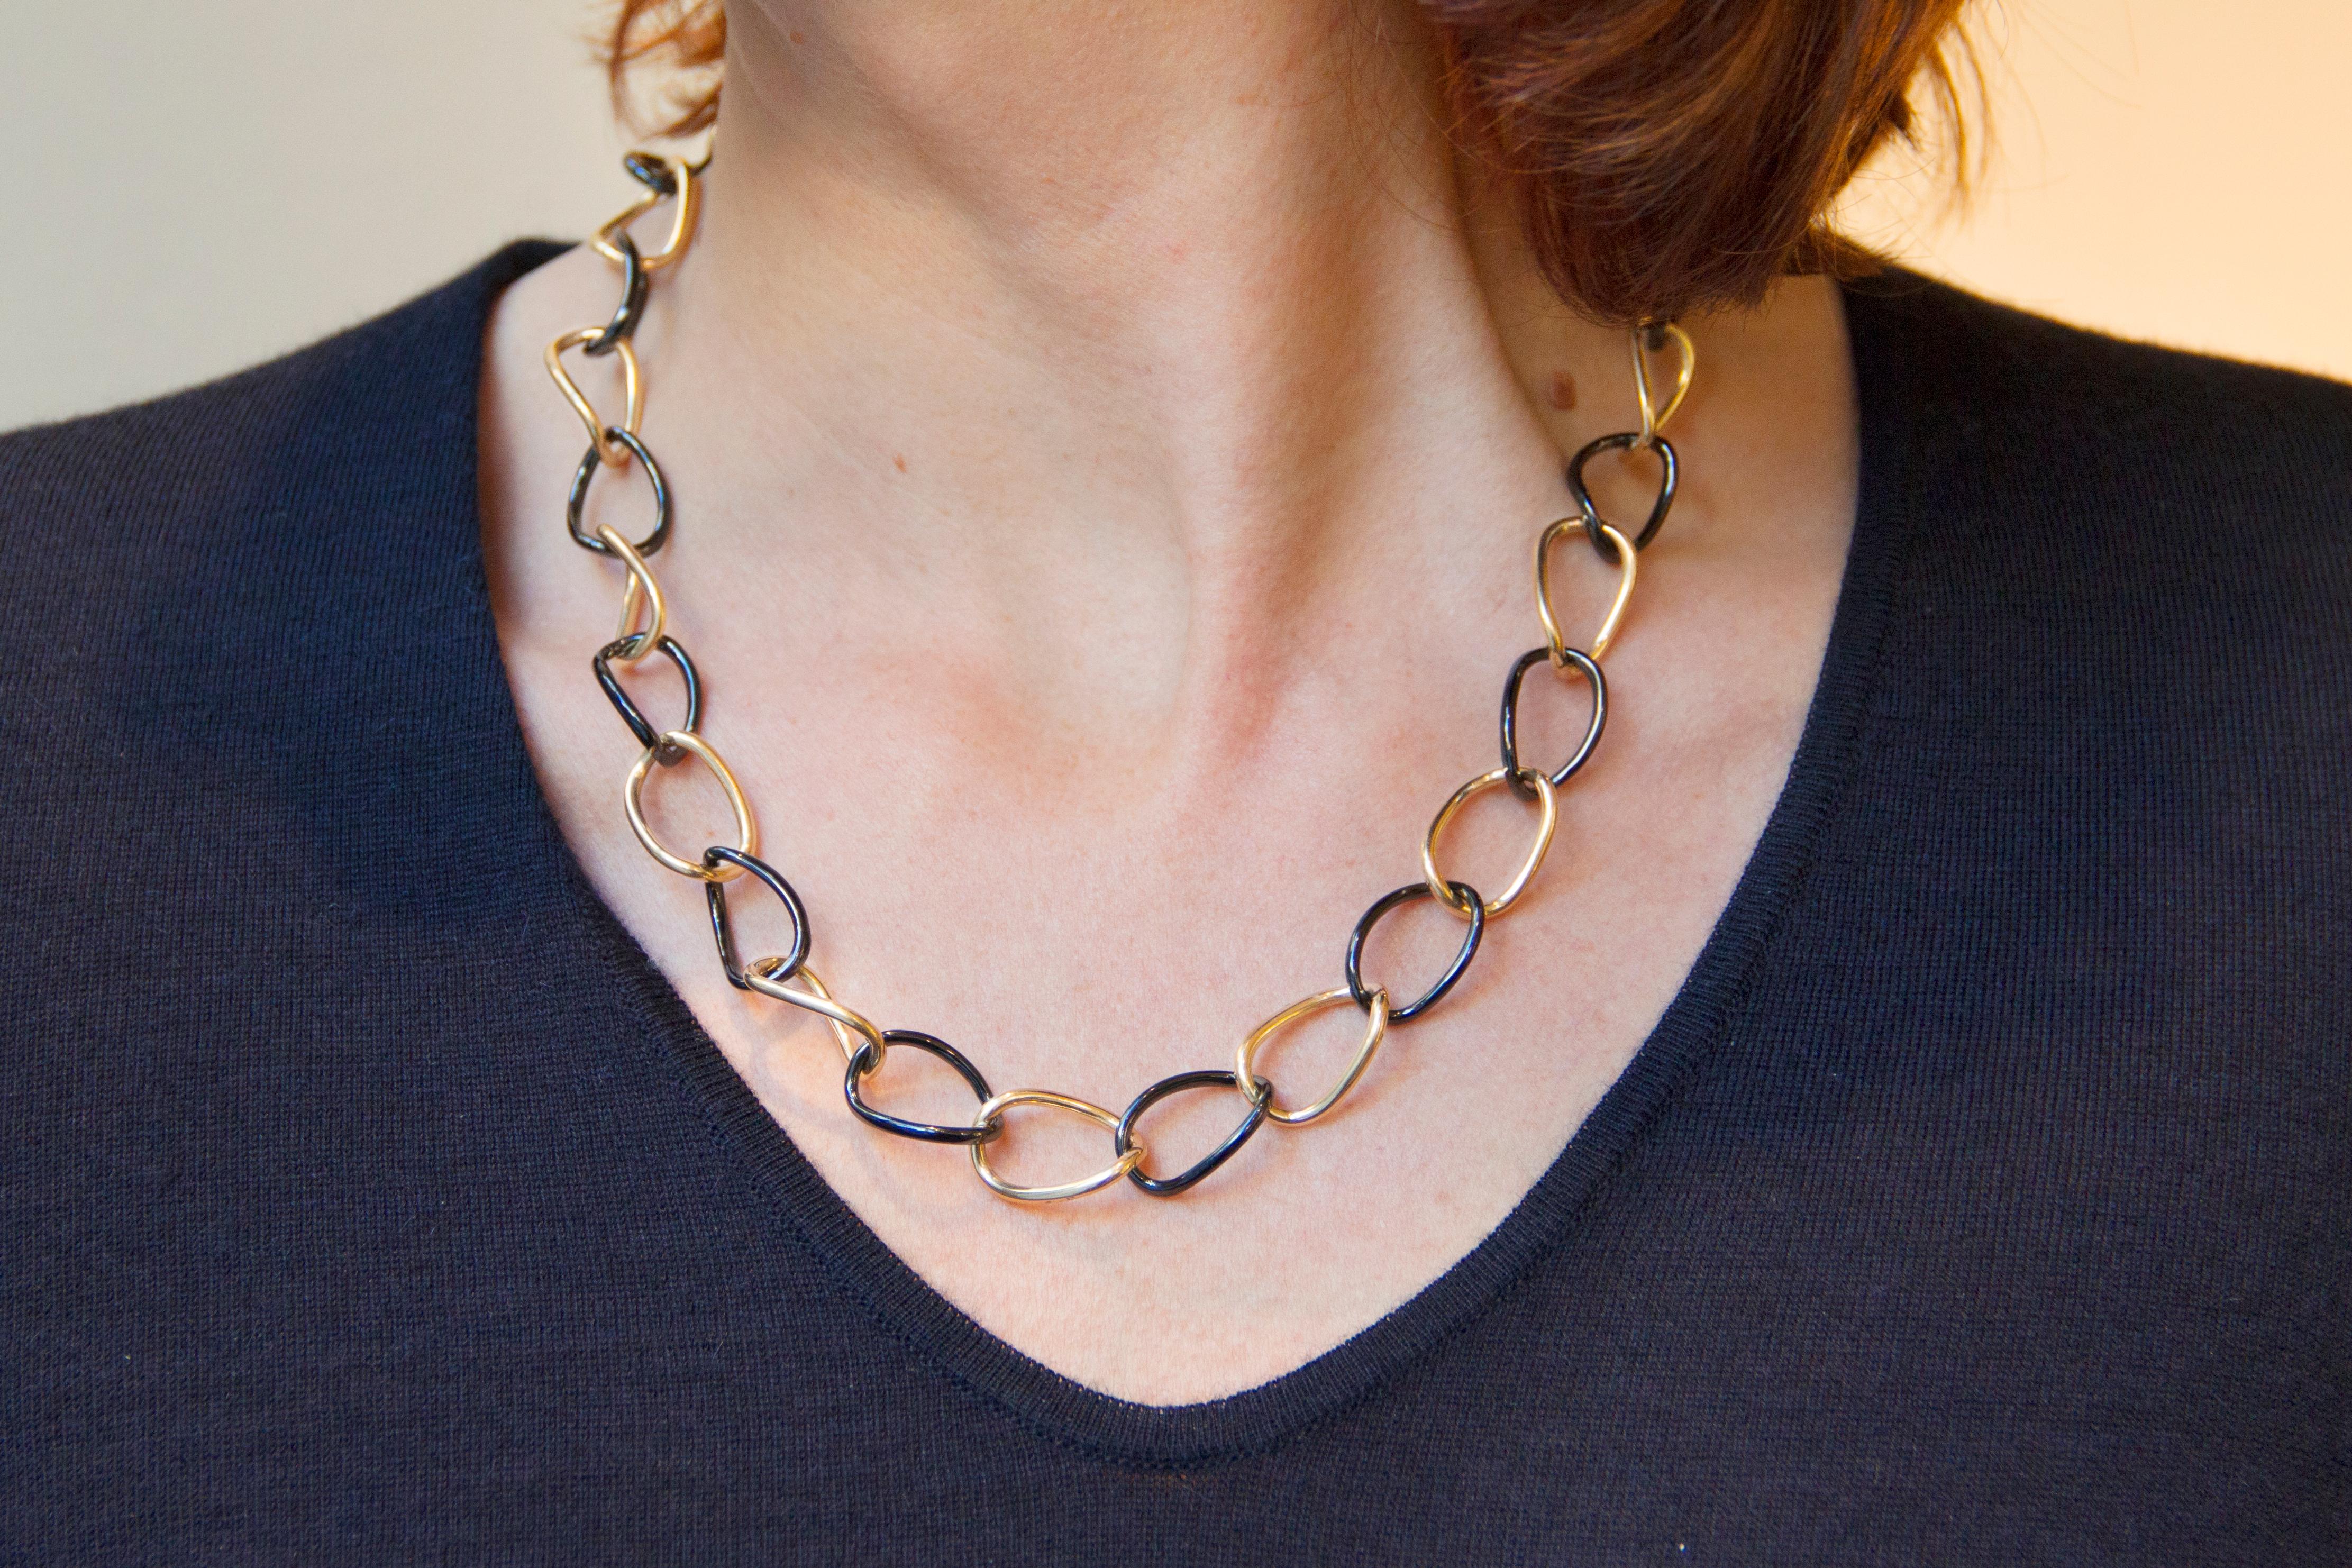 Jona design collection, hand crafted in Italy, alternating 18k yellow gold and black high-tech ceramic curb-link necklace. 
Dimension: Lenght 52 cm
Chain : H 0.78 in / 19 mm X W 0.52 in / 13.26 mm X D 0.08 in / 2.08 mm
Weight : 31.04 g
With a